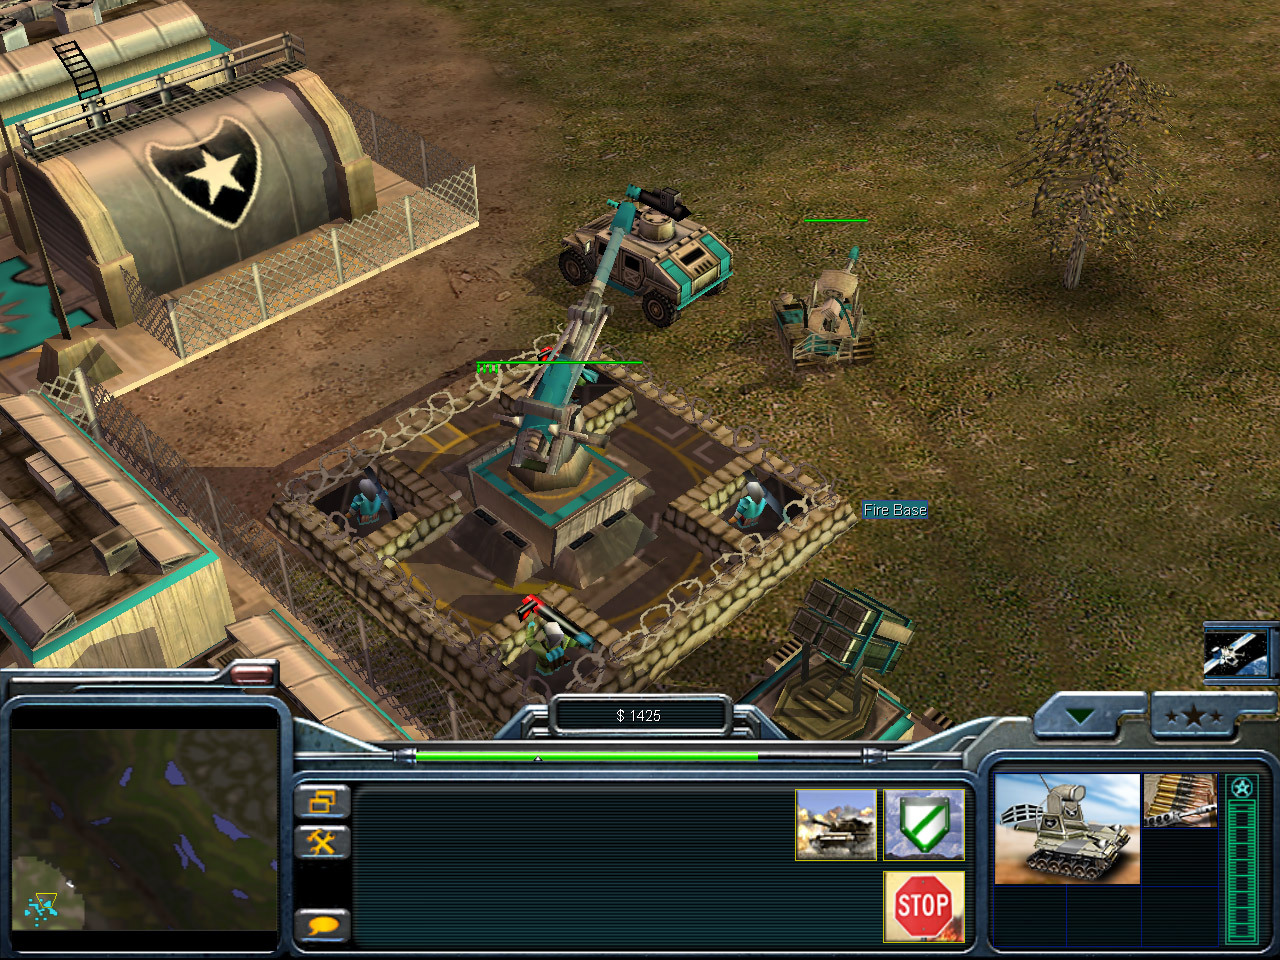 Command conquer читы. Command and Conquer Zero hour. Command and Conquer Generals 2022. Command & Conquer: Generals - Zero hour. Command Conquer Generals 2020.